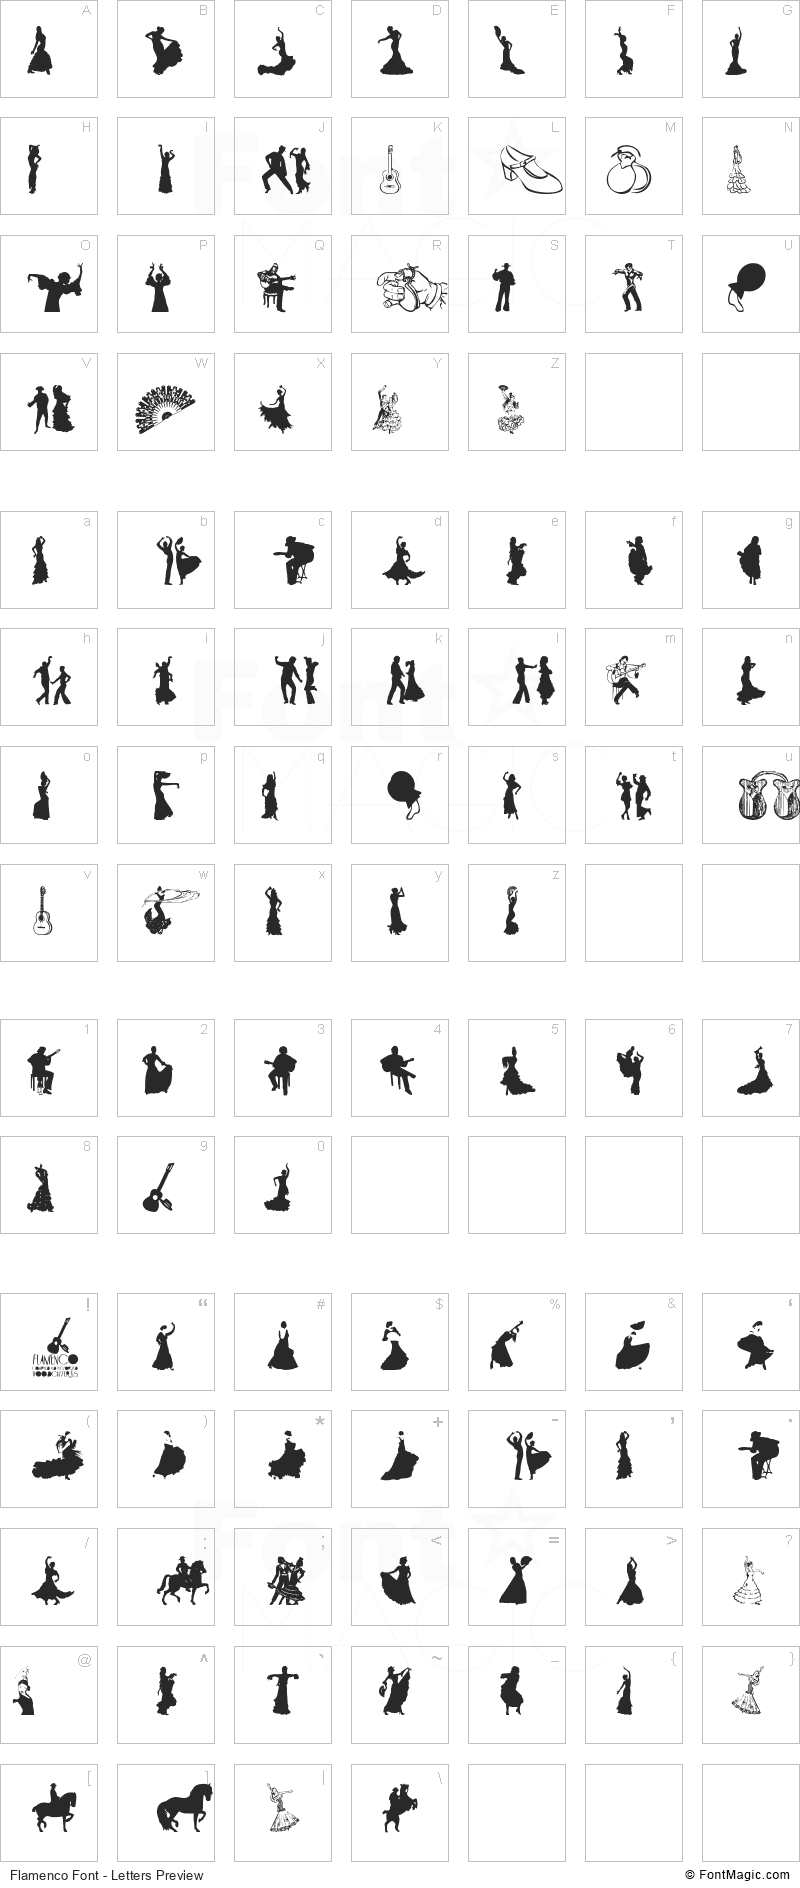 Flamenco Font - All Latters Preview Chart